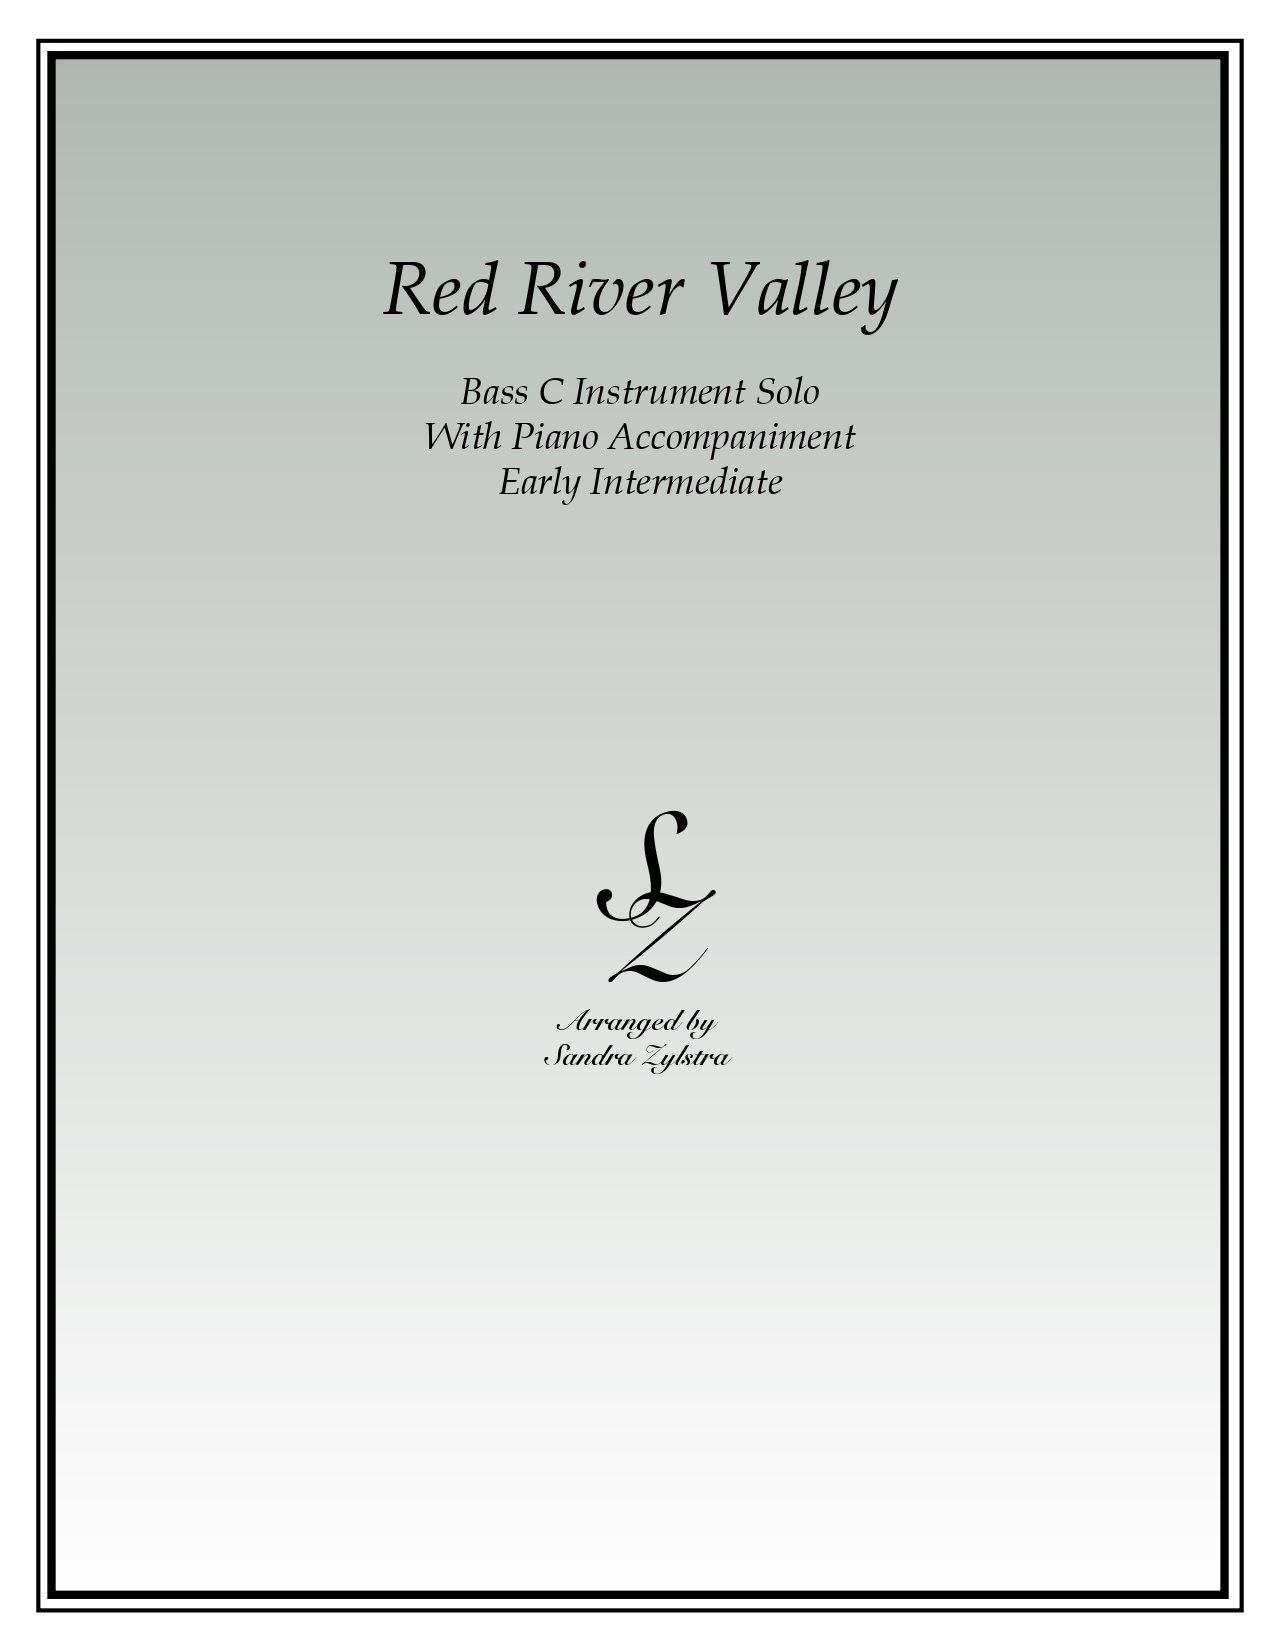 Red River Valley bass C instrument part cover page 00011